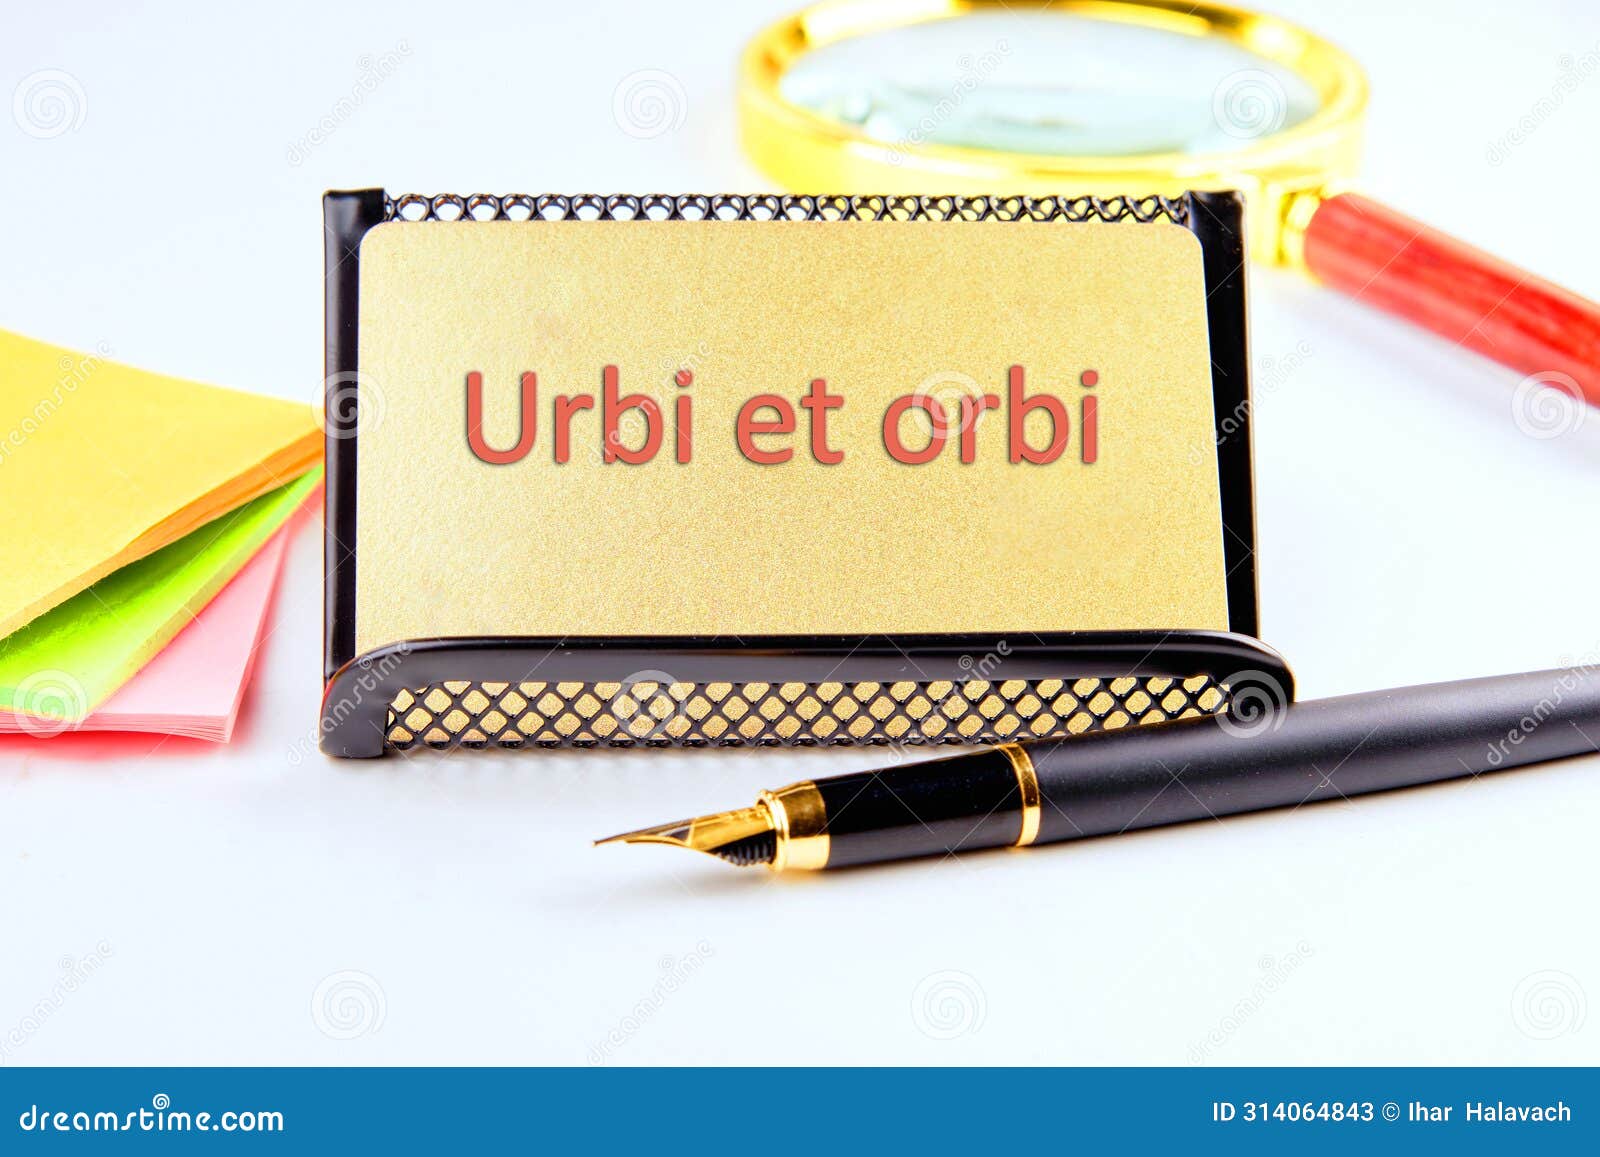 urbi et orbi is a latin saying that represents the formula of the solemn